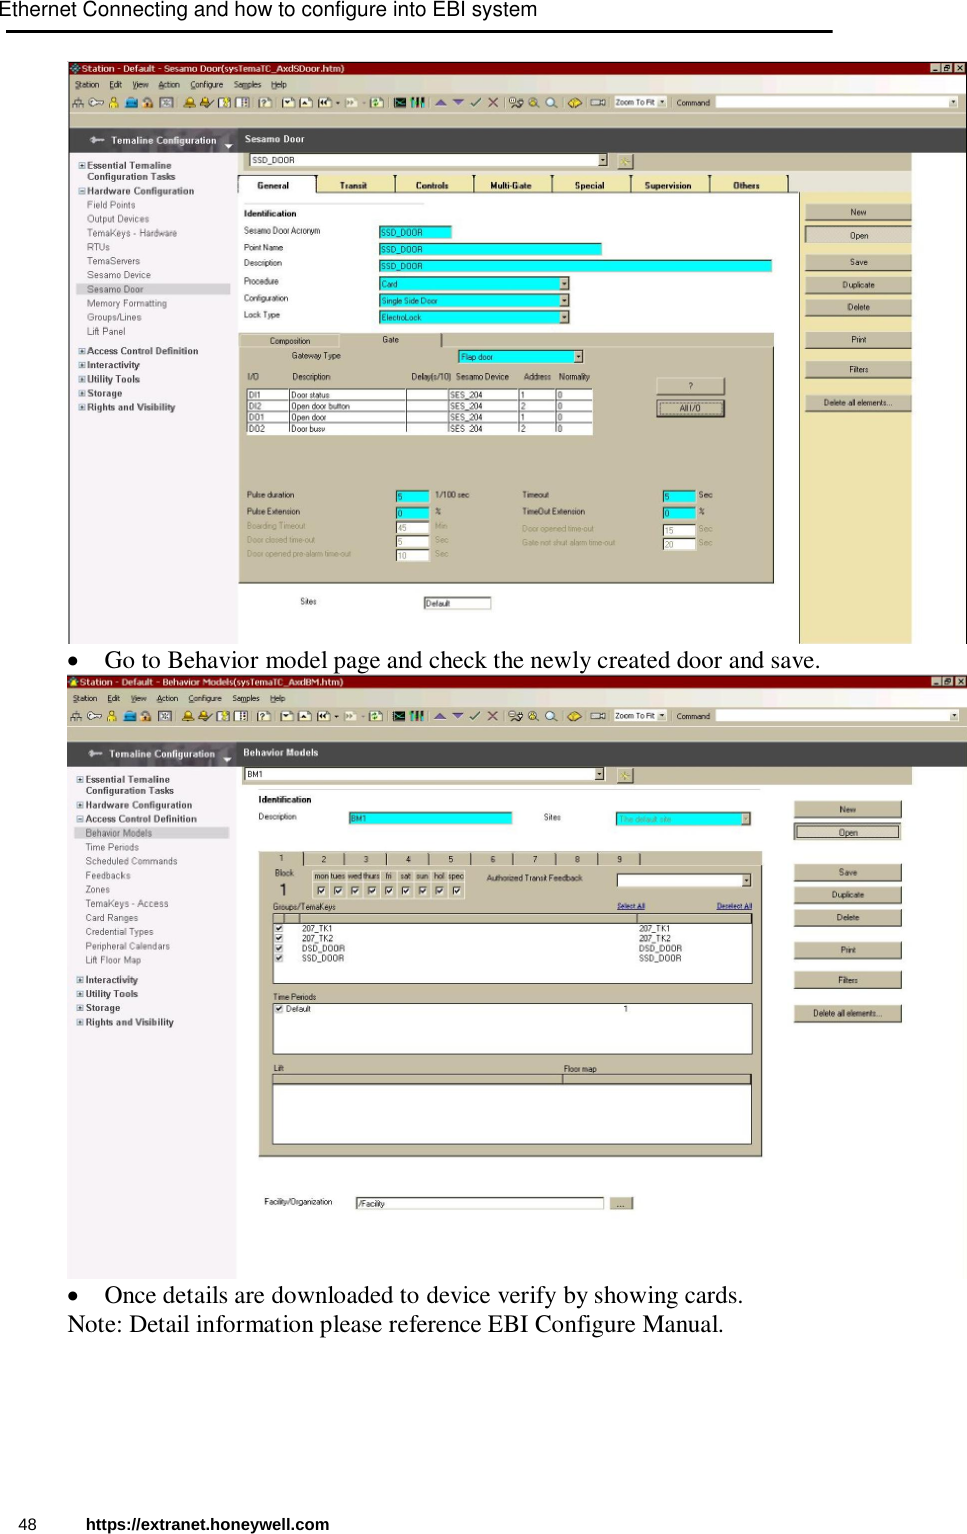   Go to Behavior model page and check the newly created door and save.   Once details are downloaded to device verify by showing cards.       Note: Detail information please reference EBI Configure Manual.  Ethernet Connecting and how to configure into EBI system48 https://extranet.honeywell.com